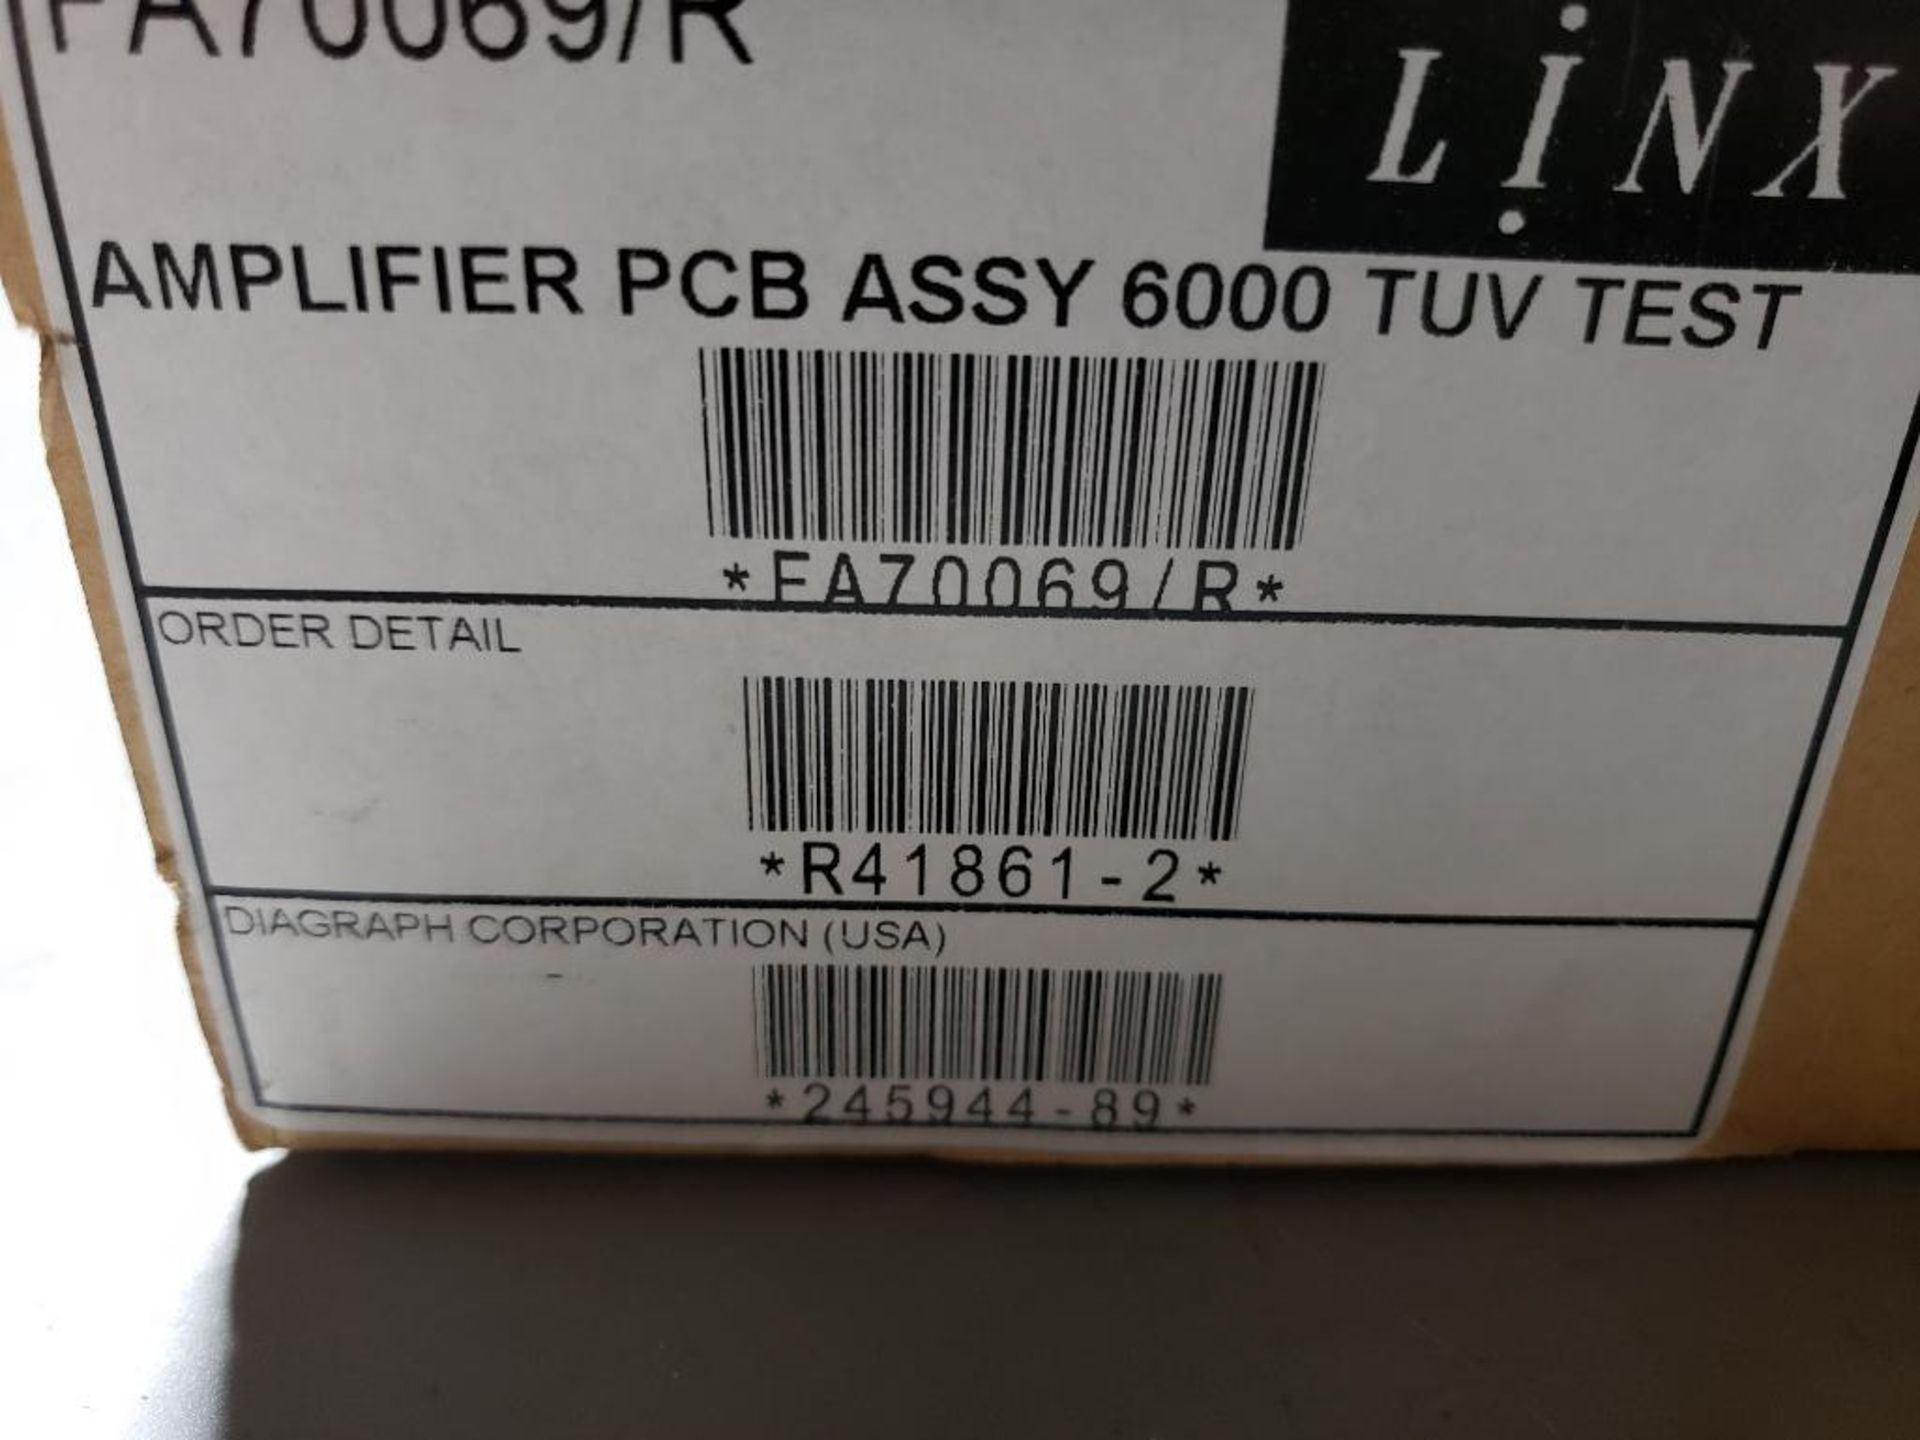 Linx amplifier PCB assembly. Model 6000 TUV. New in box. - Image 3 of 4